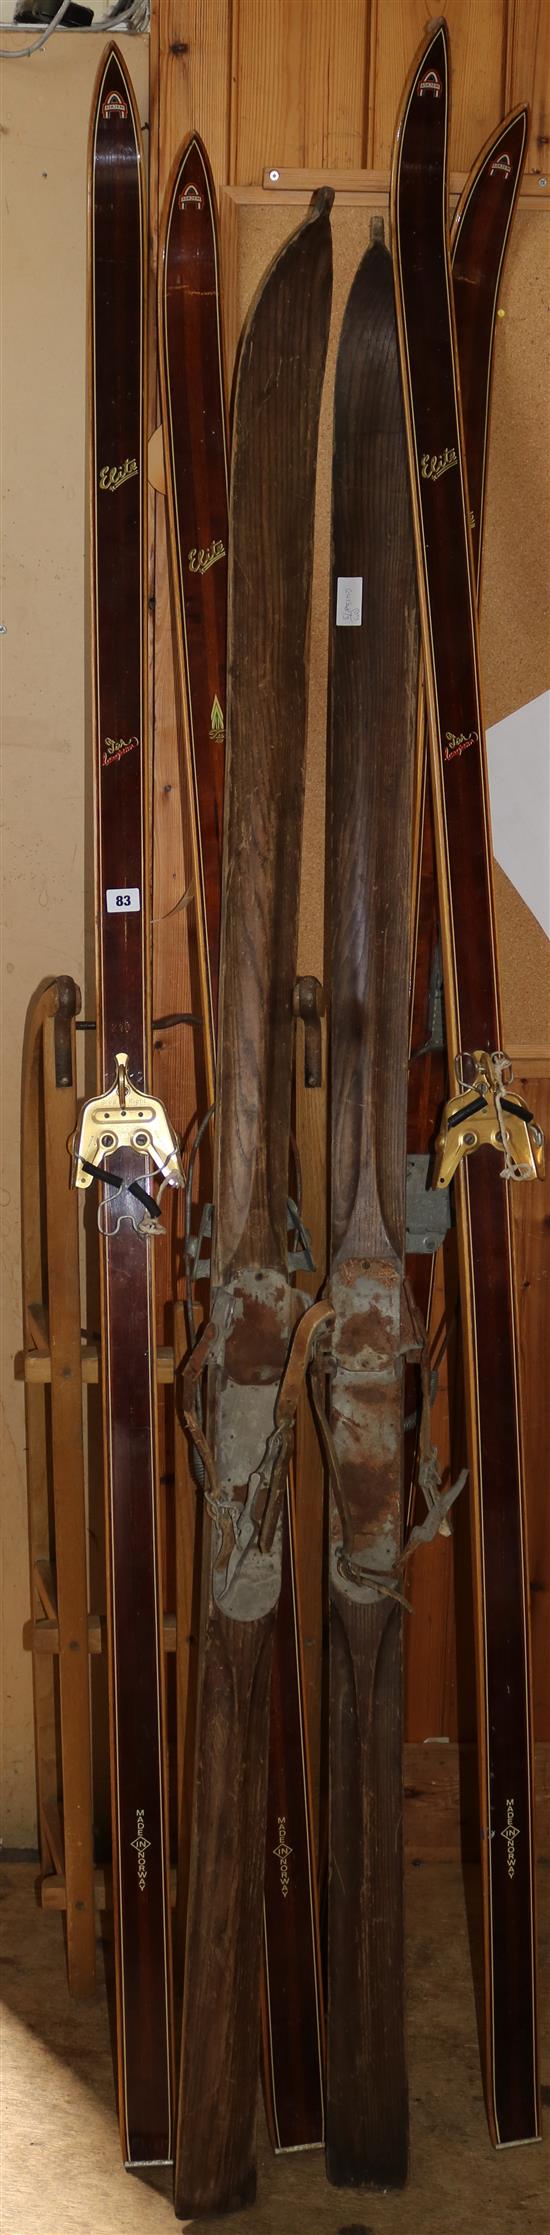 3 pairs vintage skis and a sledge